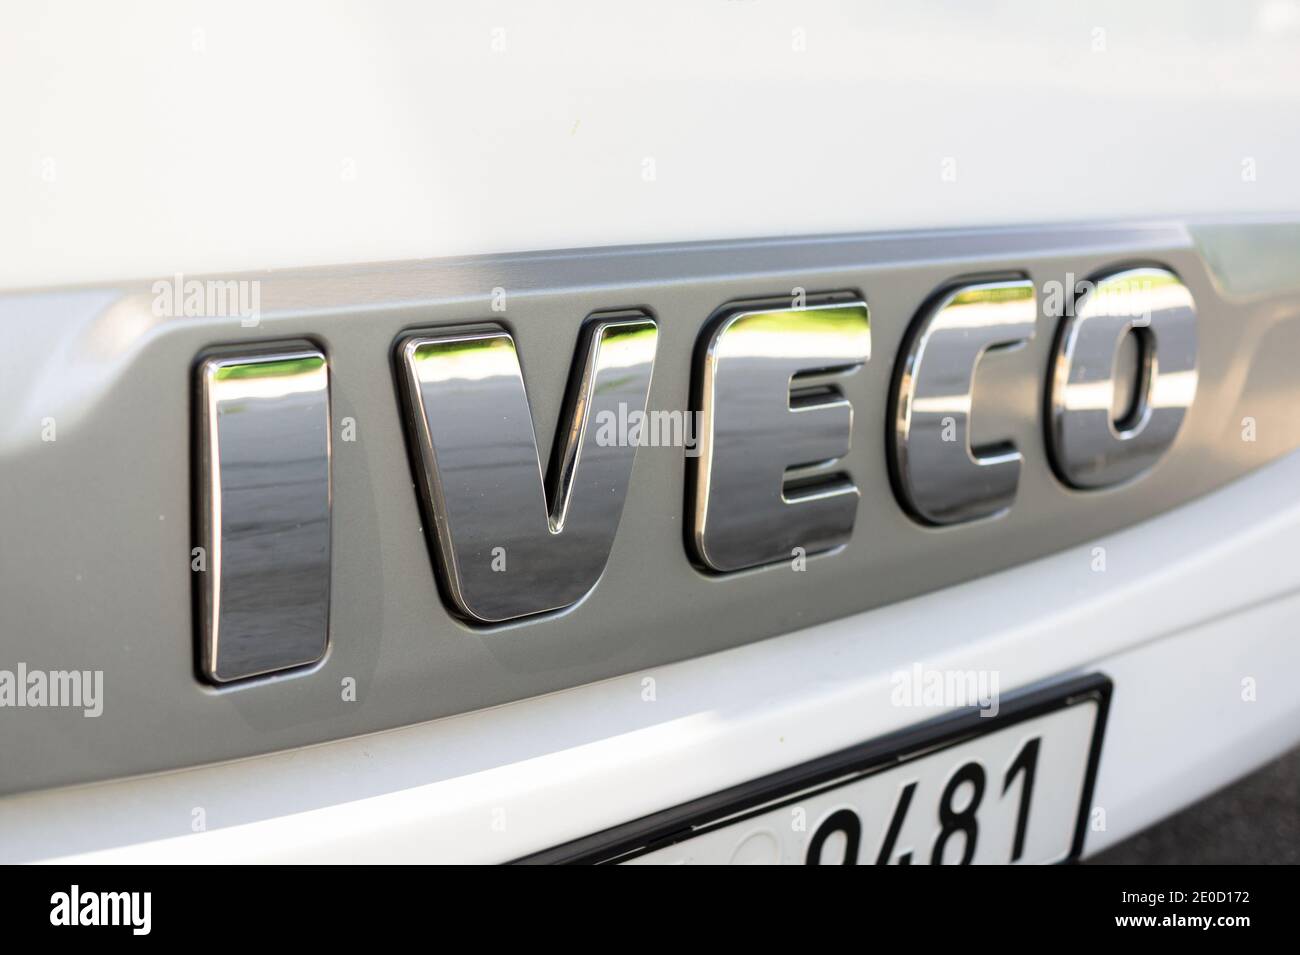 Hranice, Czechia - August 23, 2020: Iveco brand logo. Symbol of company that manufactures commercial vehicle. Stock Photo